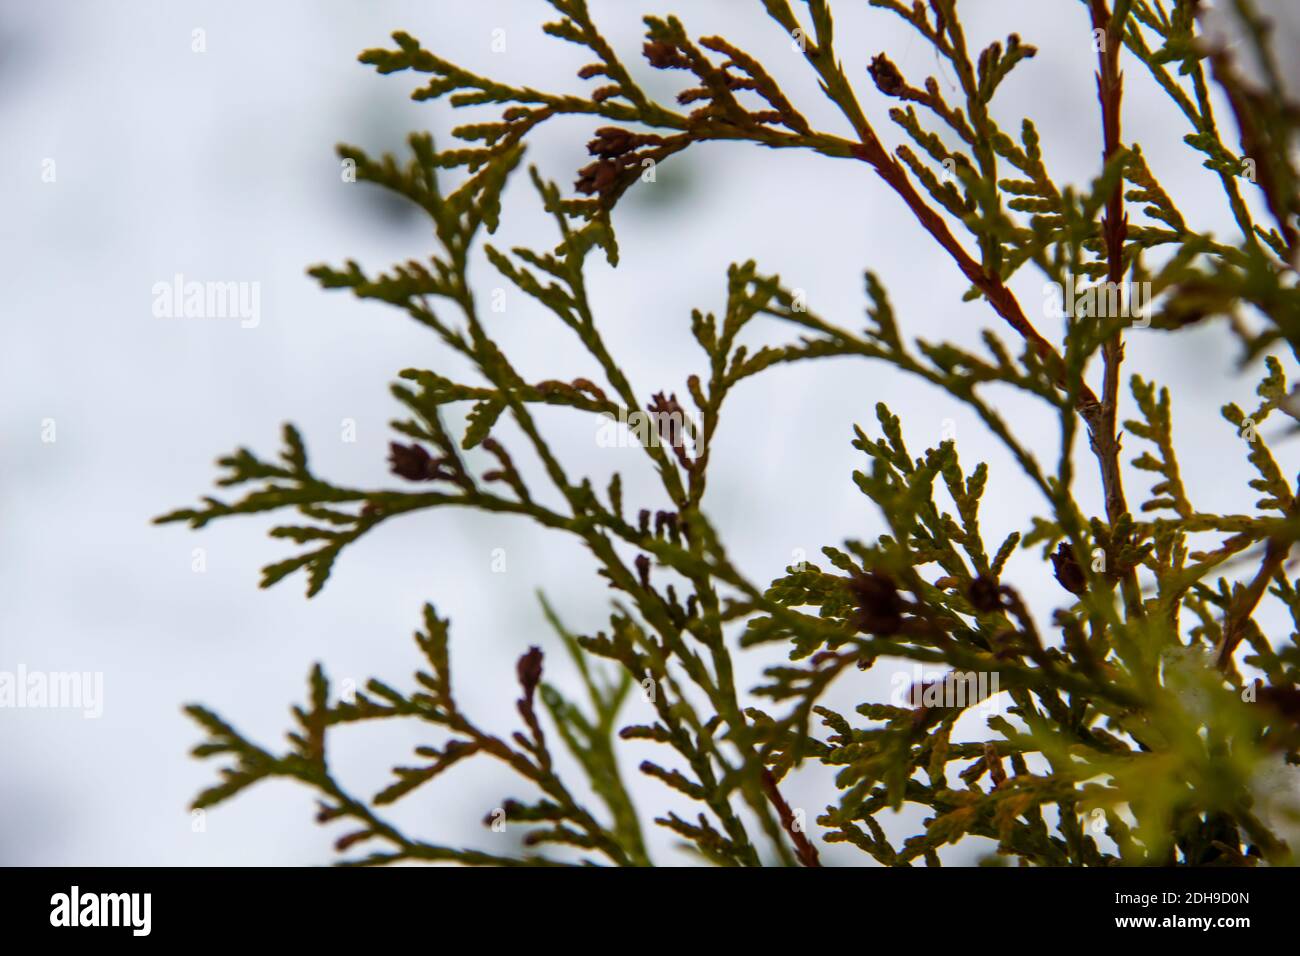 A beautiful leaves of coniferous tree Thuja. CloseUp of green leaves of Thuja trees against snow background Stock Photo